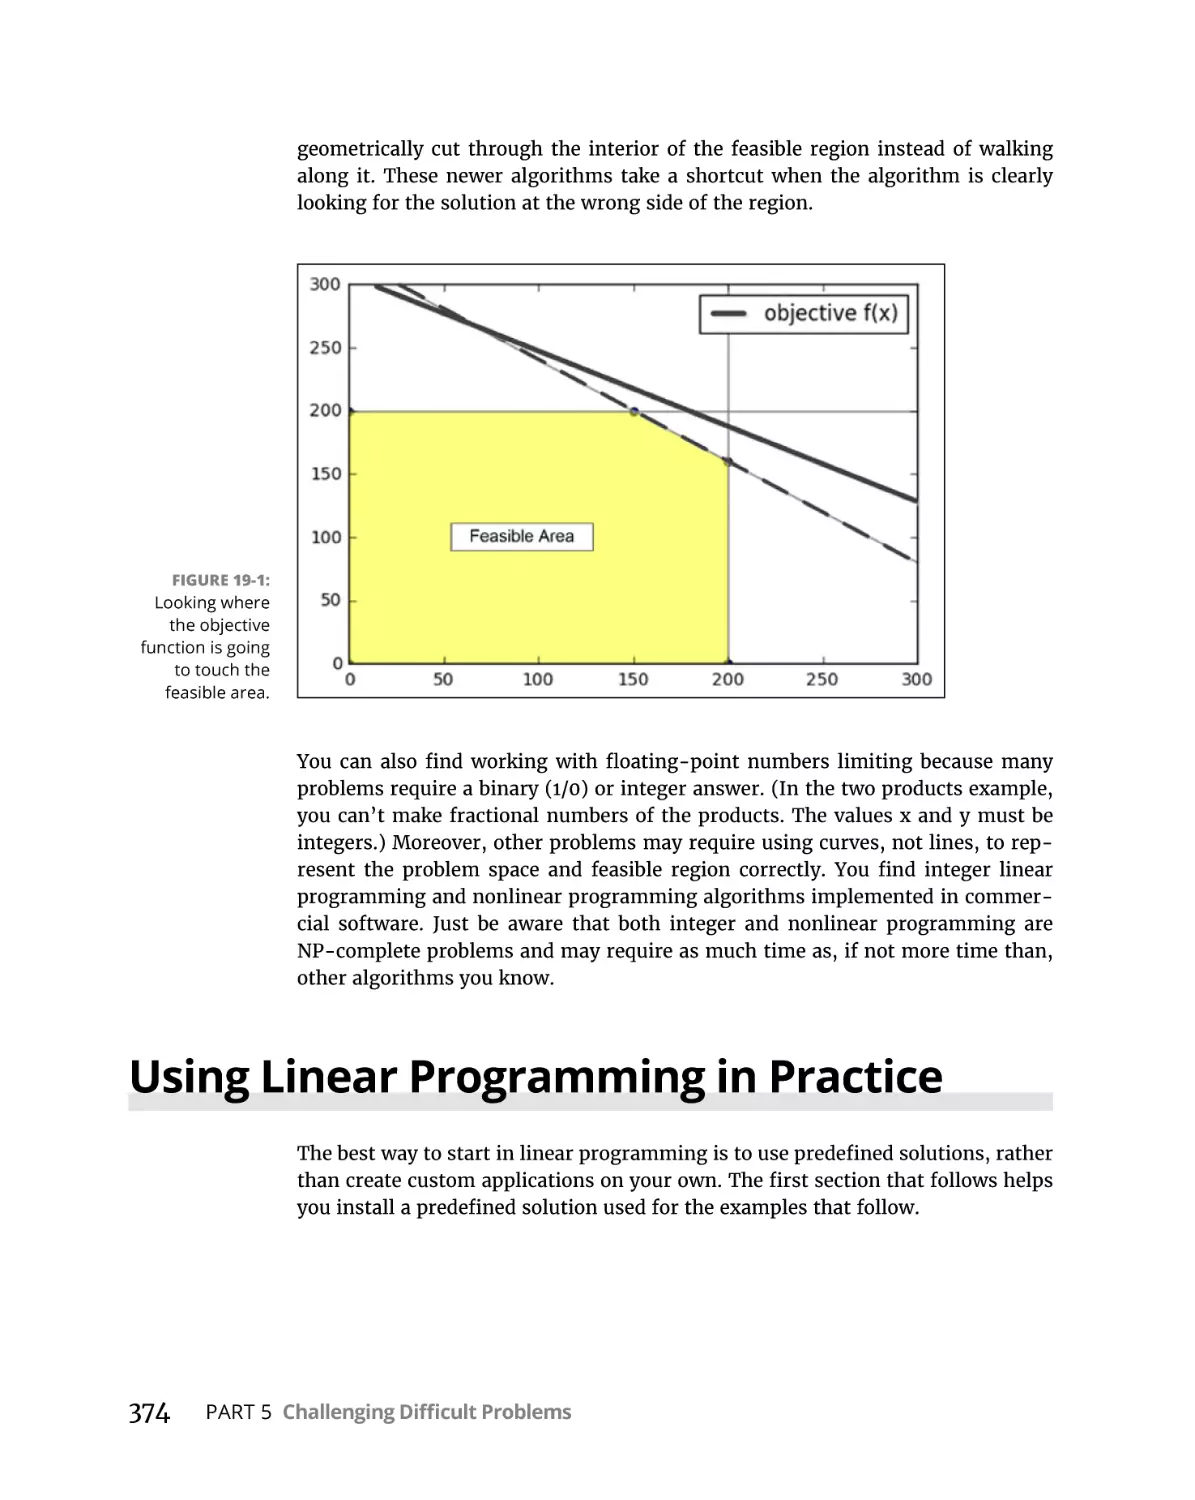 Using Linear Programming in Practice